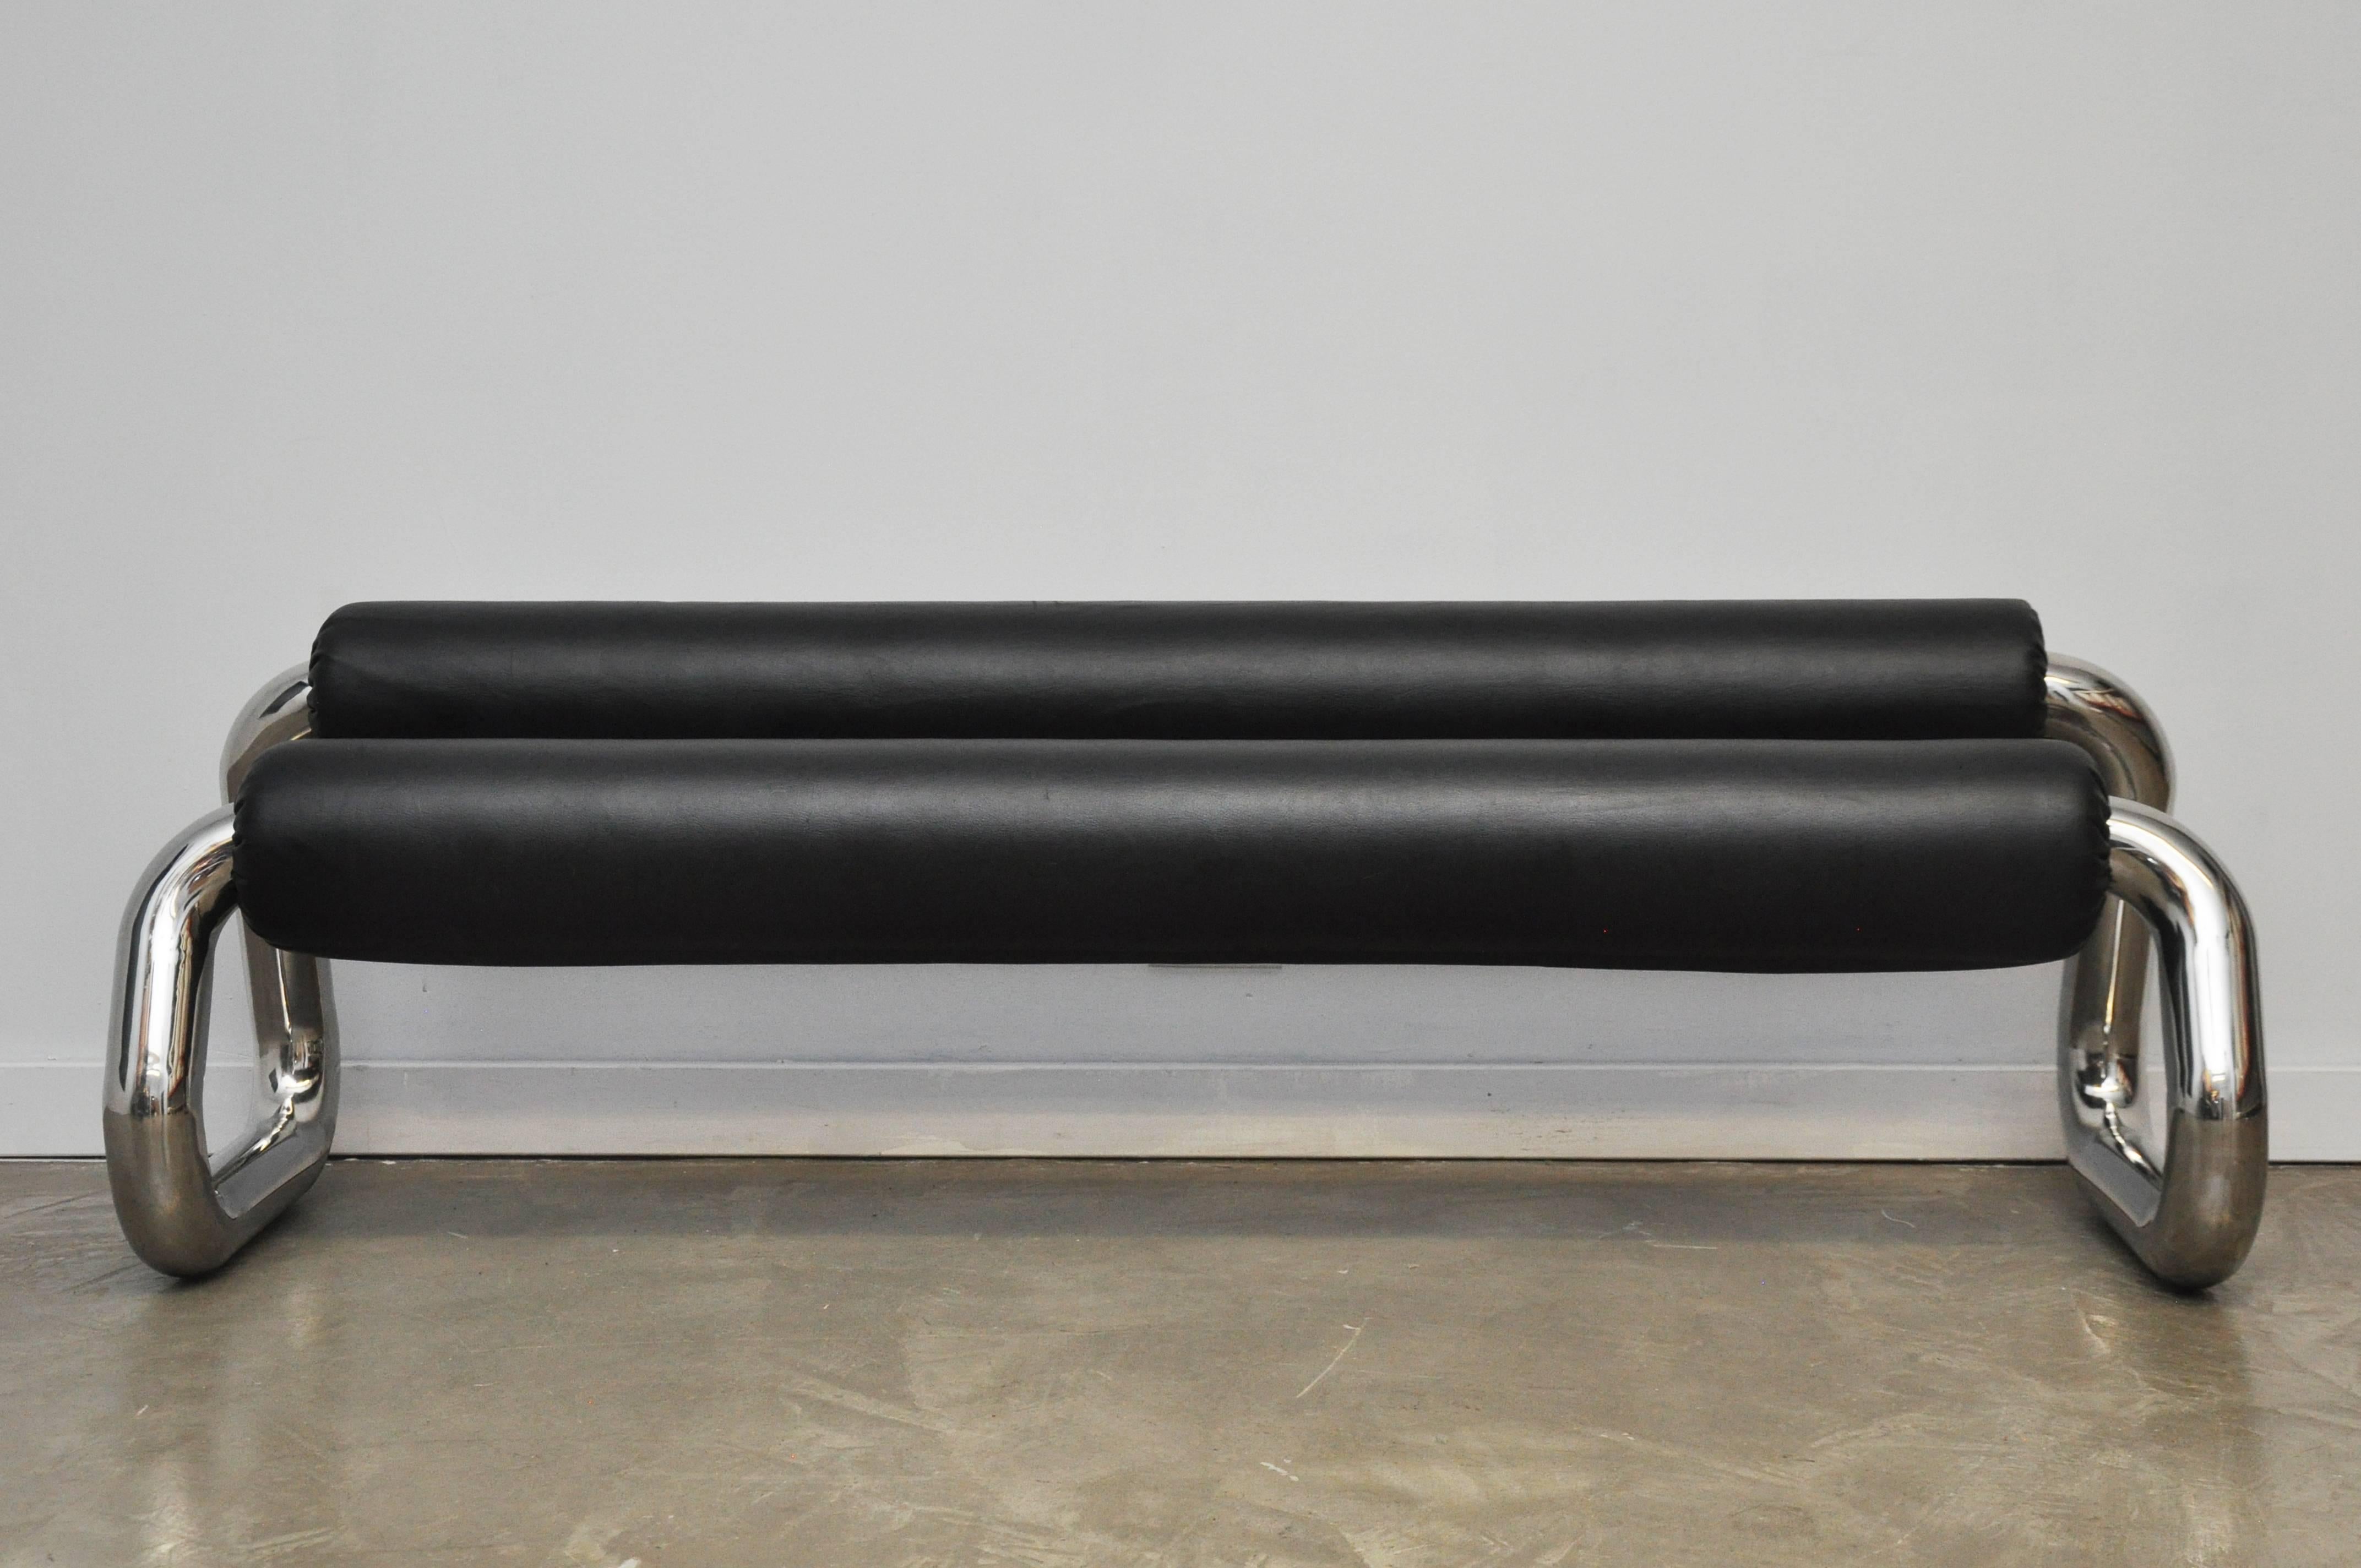 Thick stainless steel tubular bench, circa 1970s. Sculptural form with raised backrest.